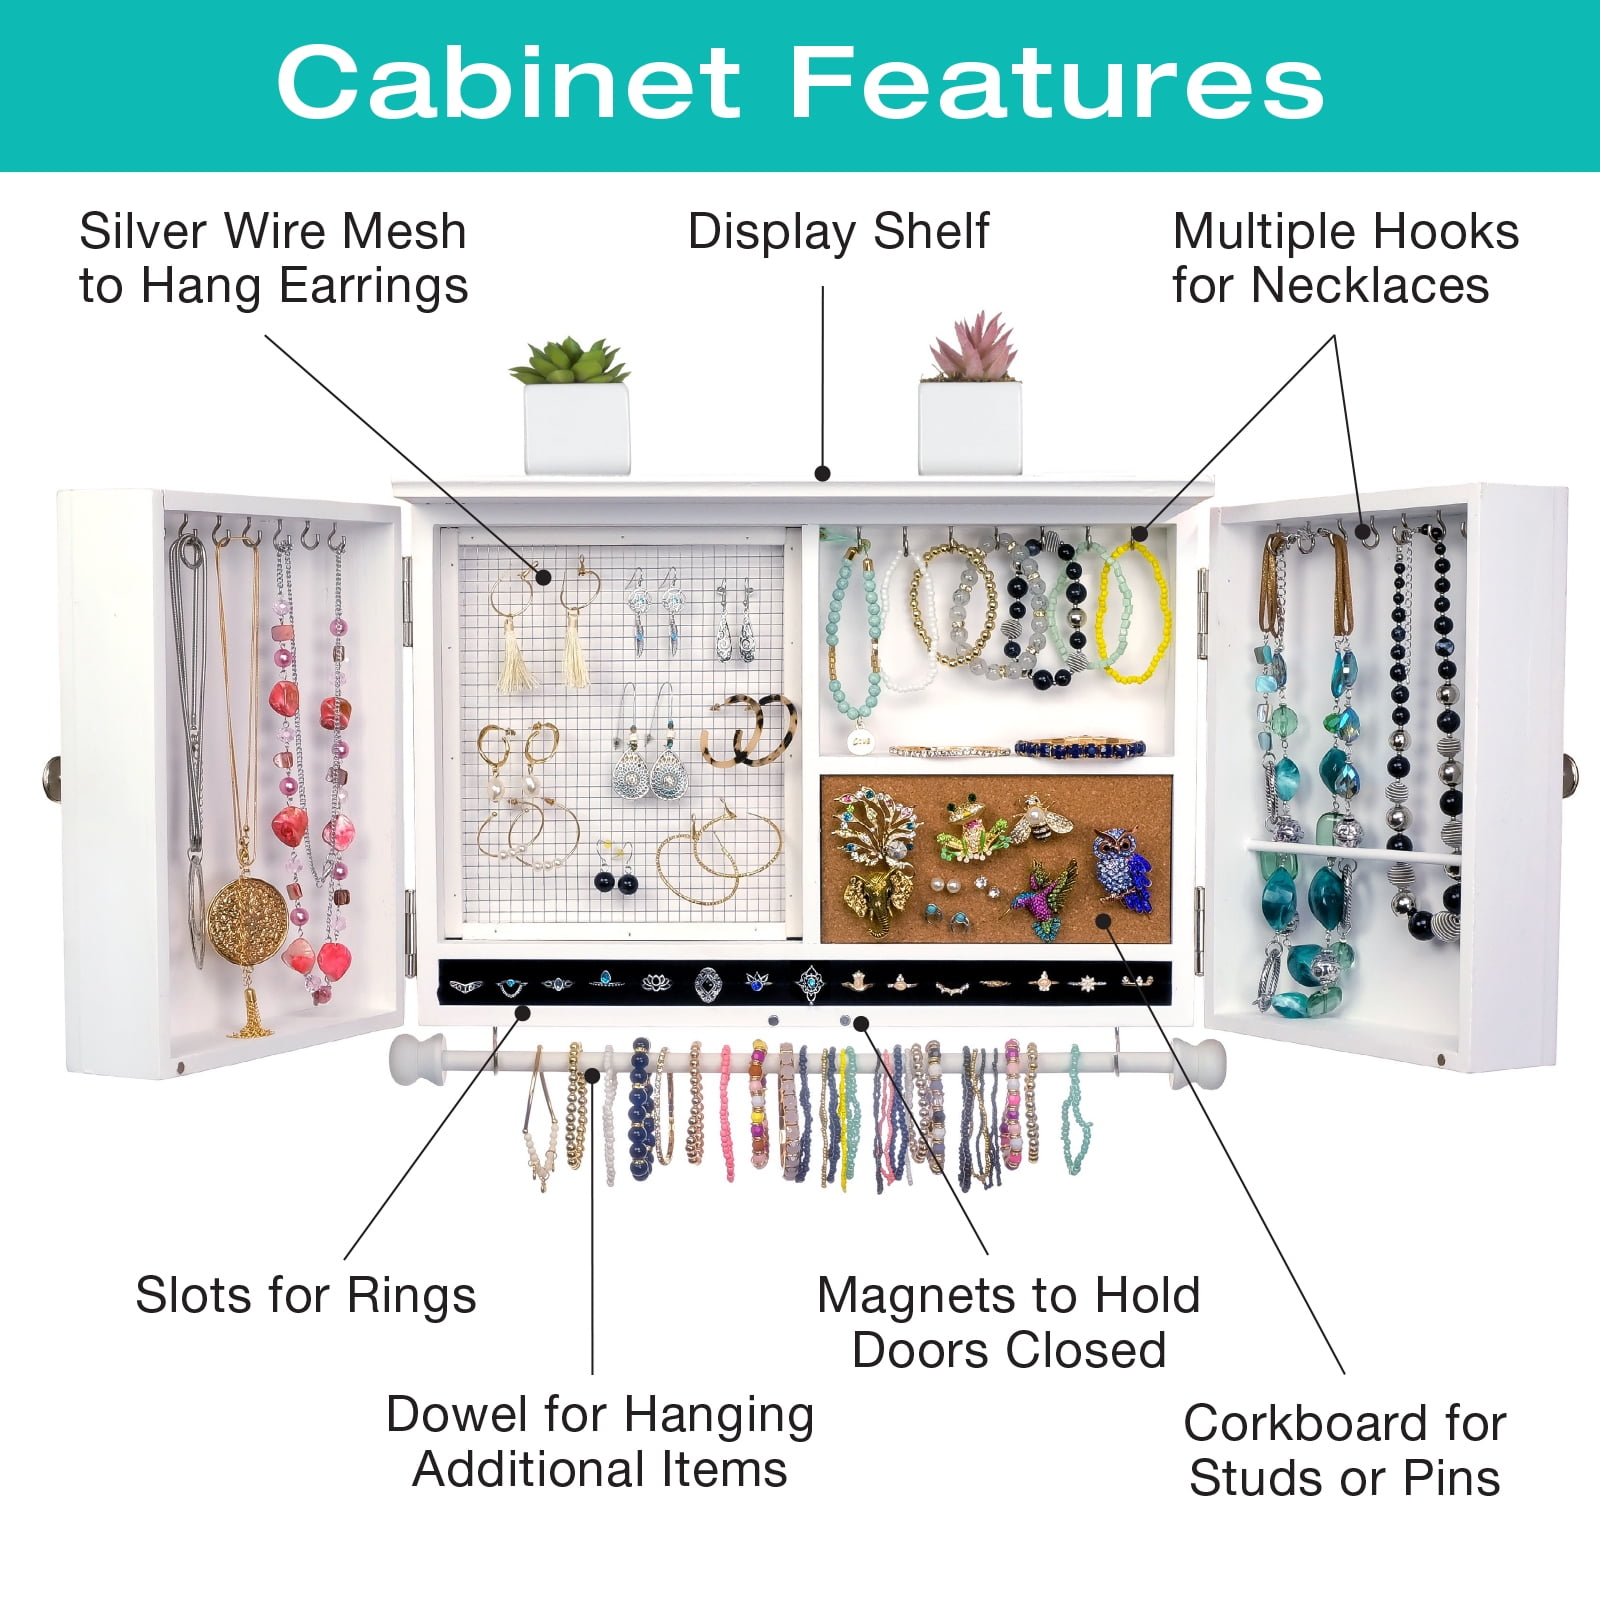 Jewelry Organizer With Extra Earring Bar, Cork Stud Earring Holder, Necklace Holder